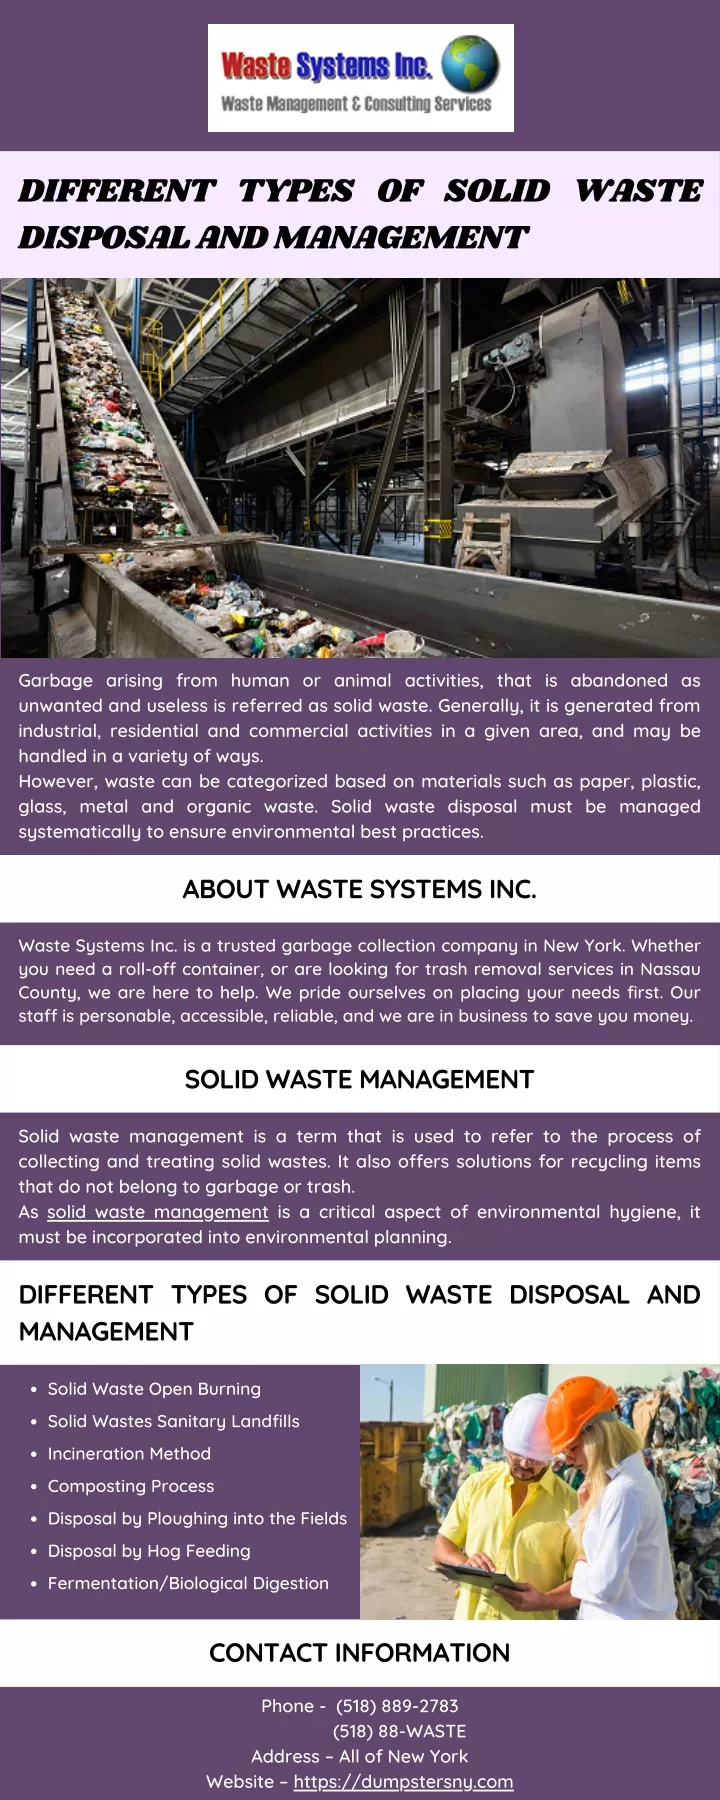 different types of solid waste disposal